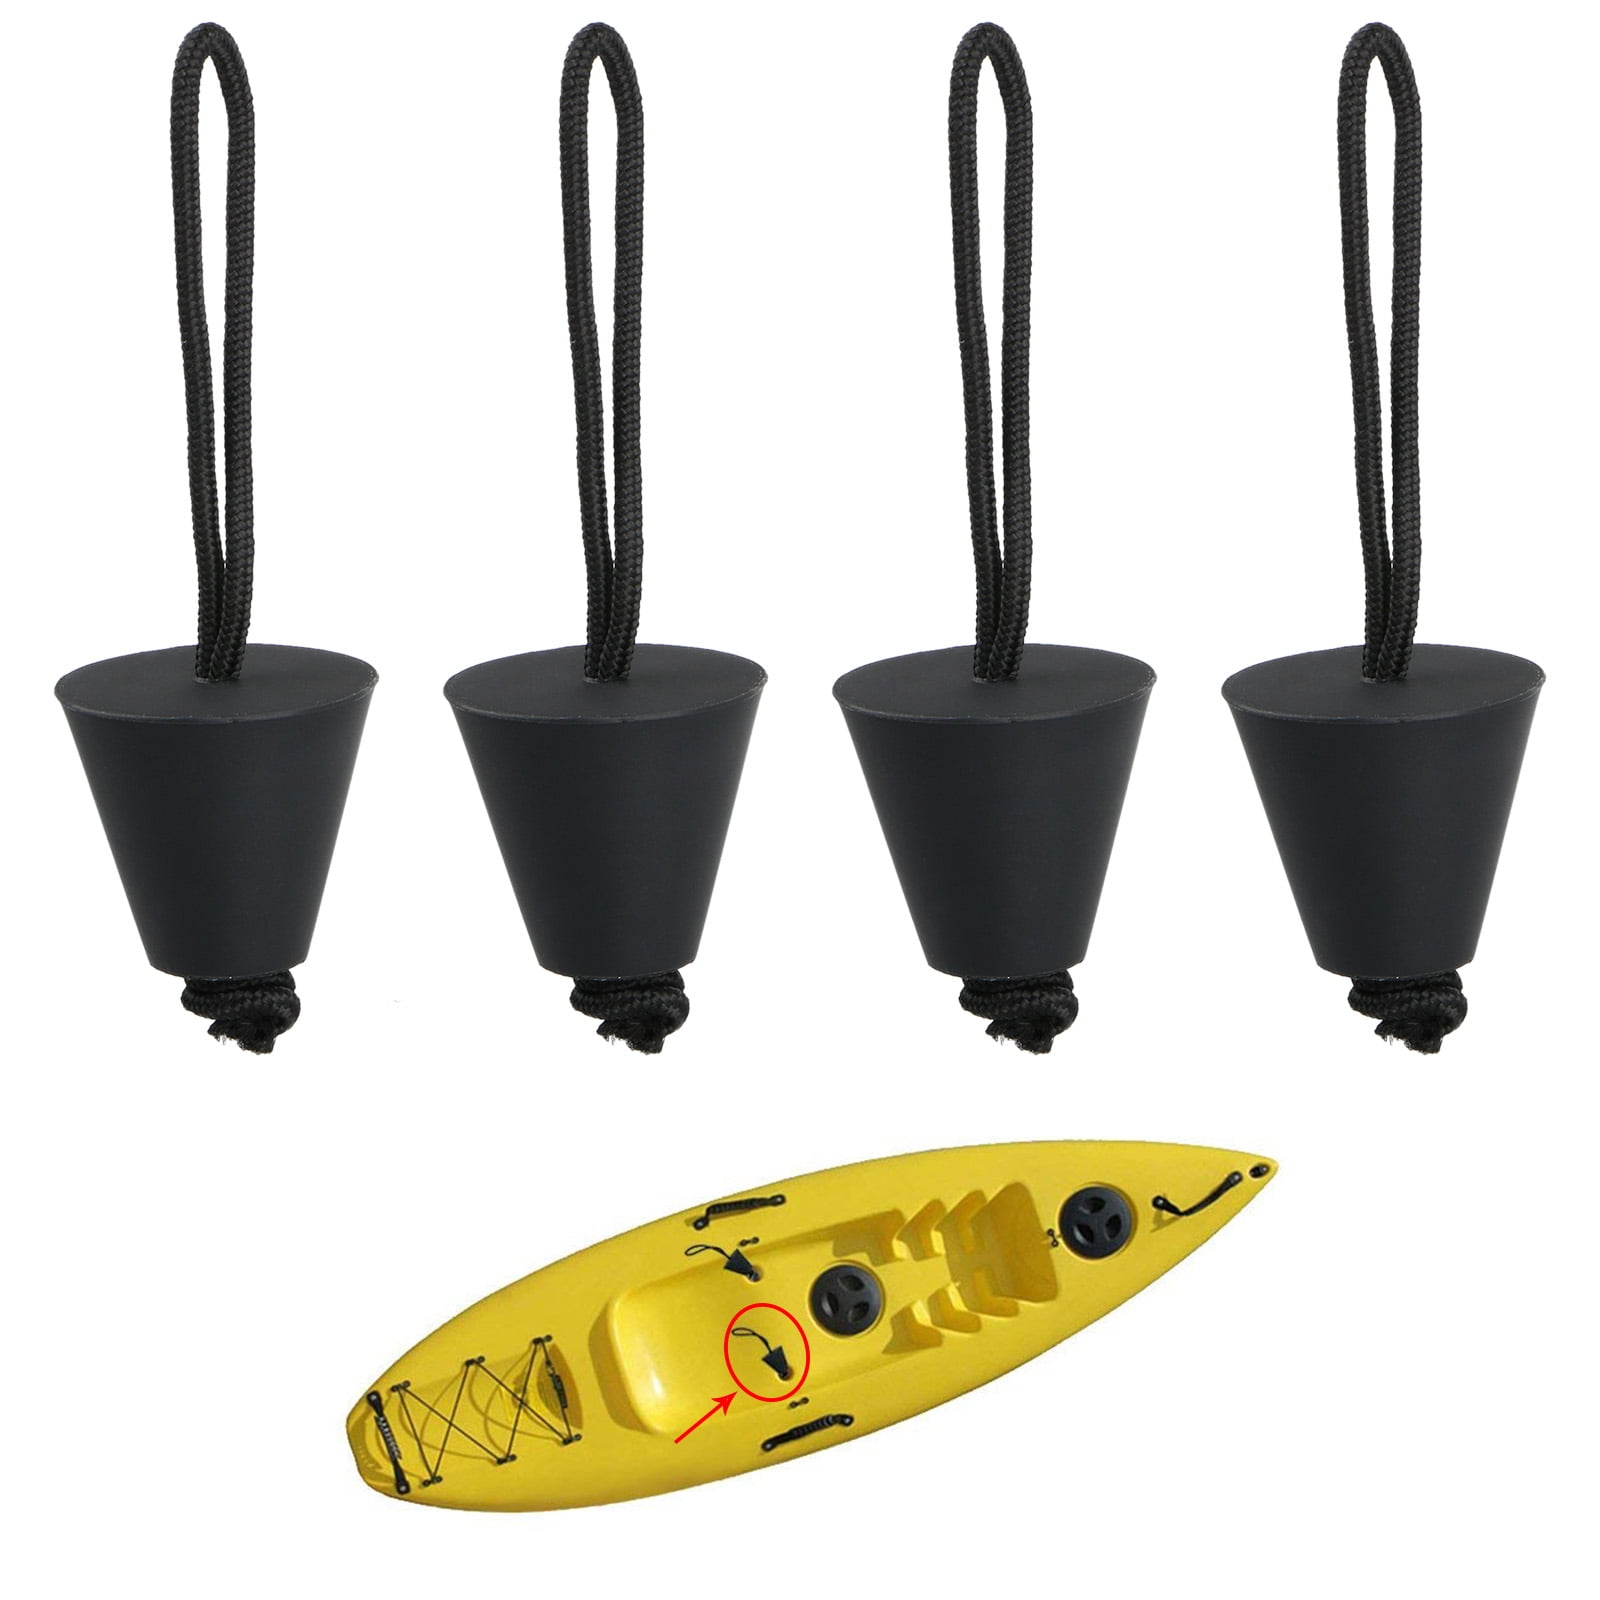 4X durable rubber kayak marine boat scupper stopper drain holes plugs Bes TP ar 